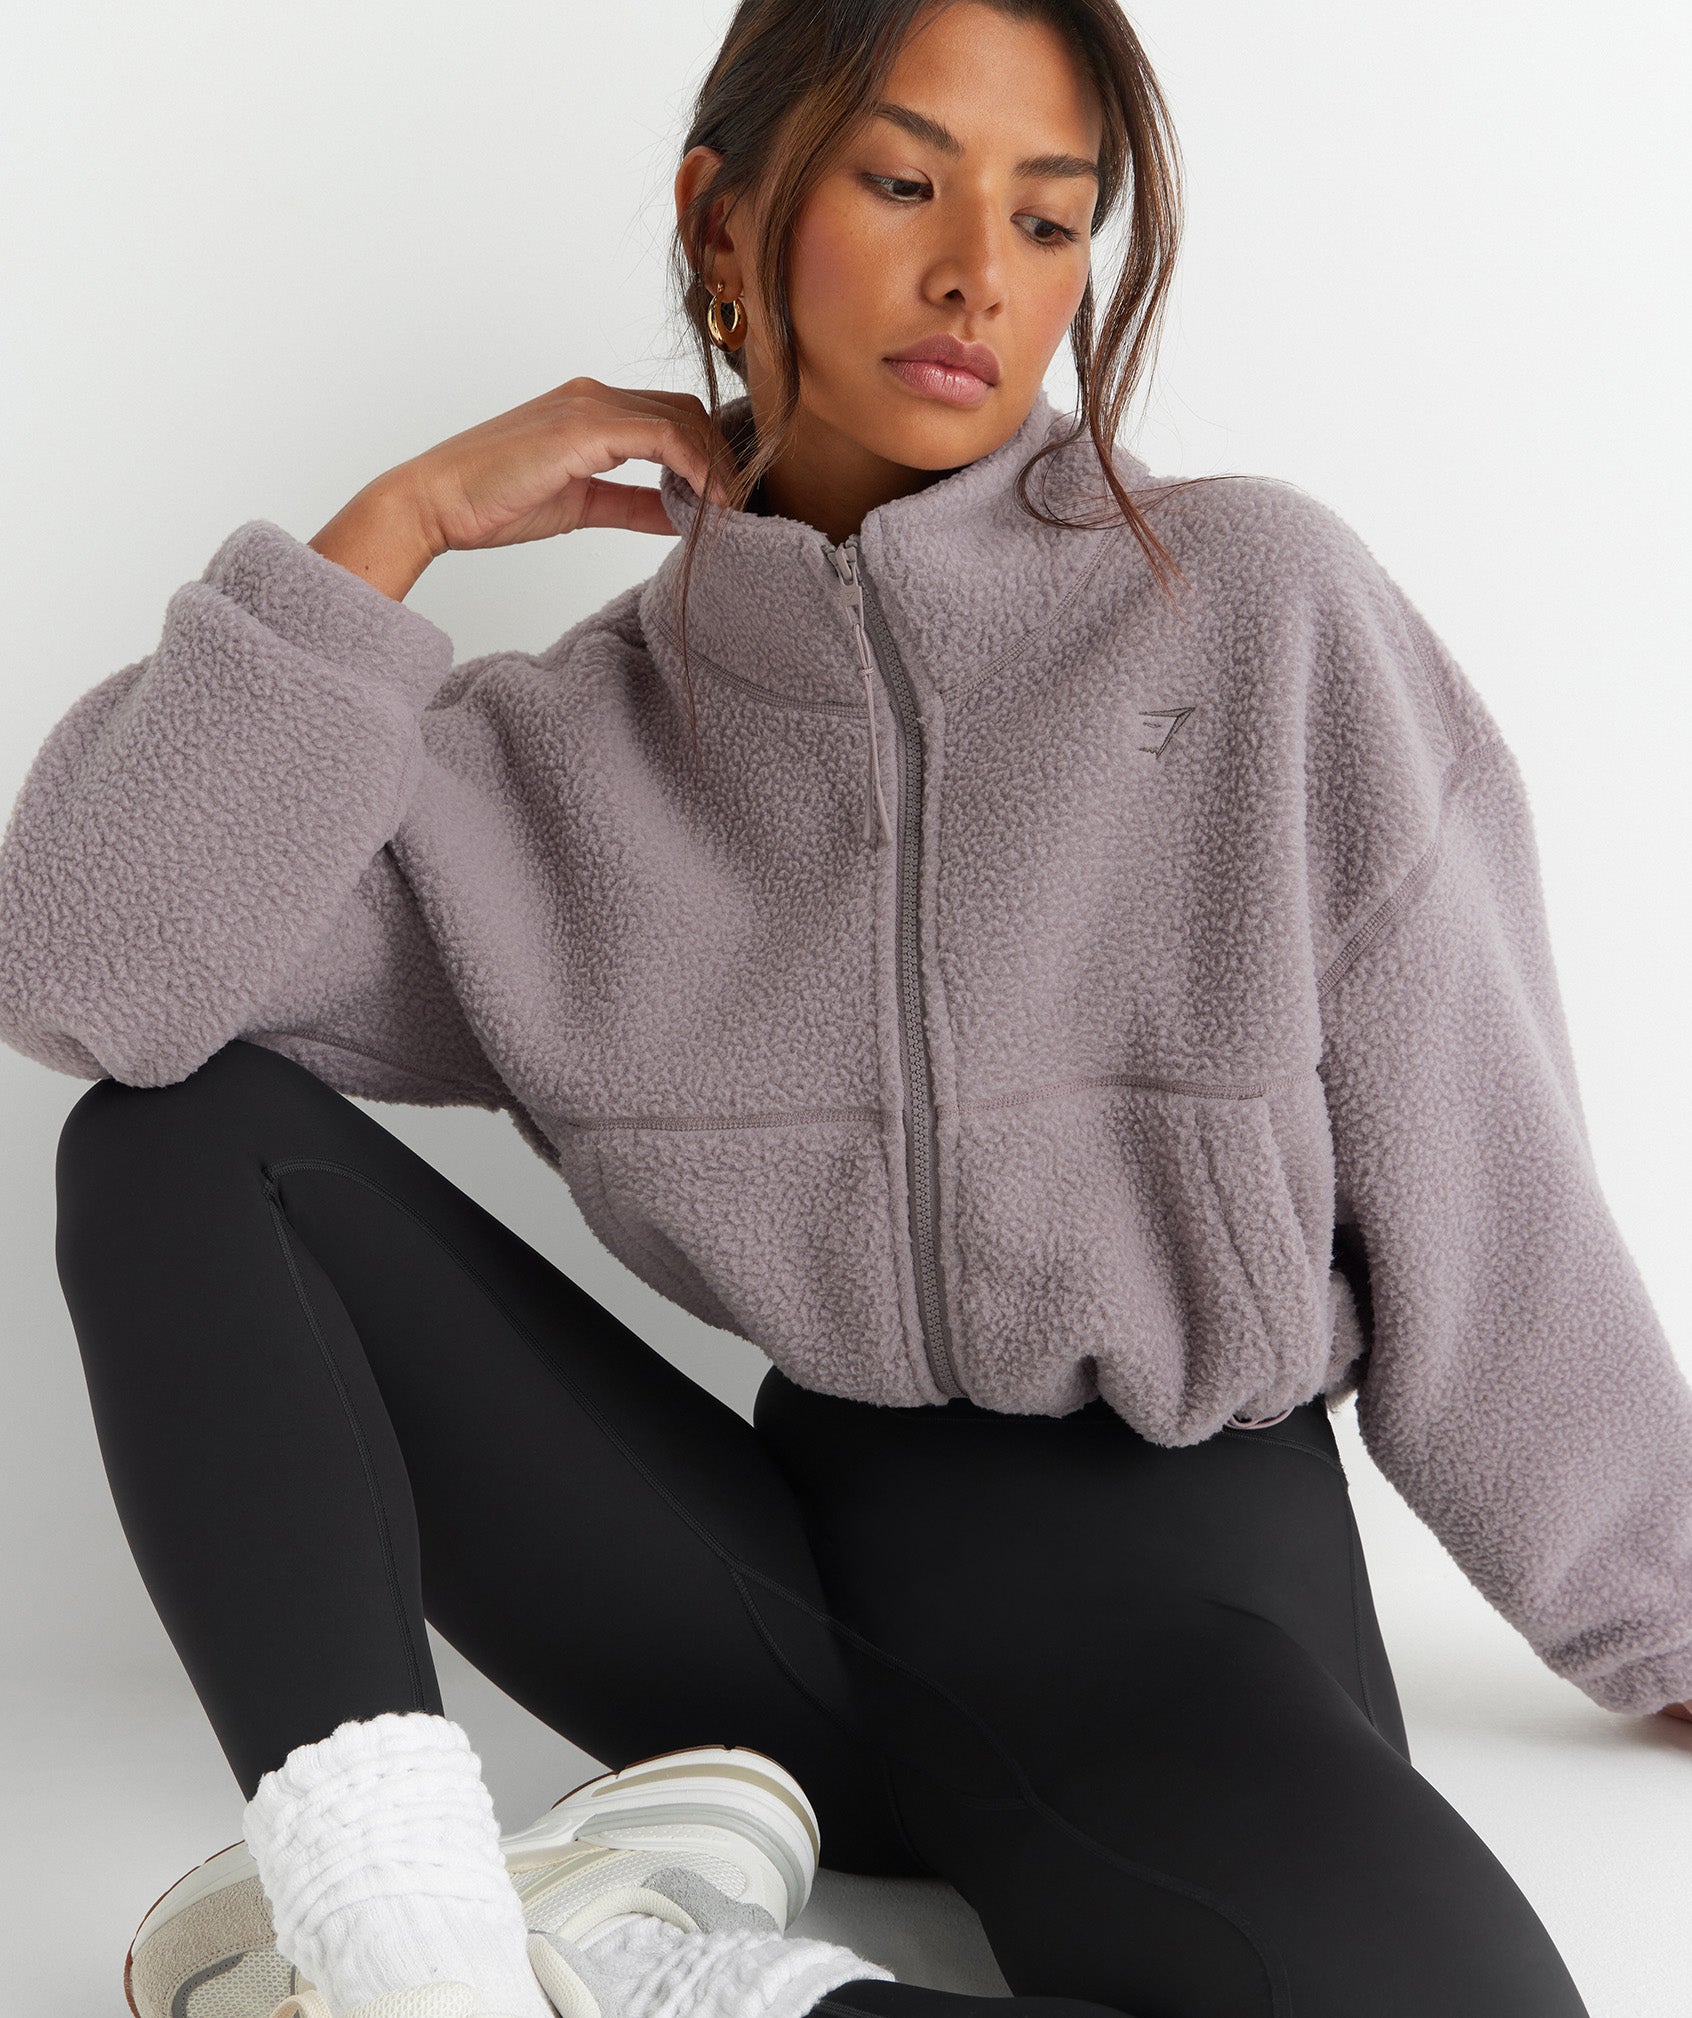 Elevate Fleece Midi Jacket in Washed Mauve - view 3